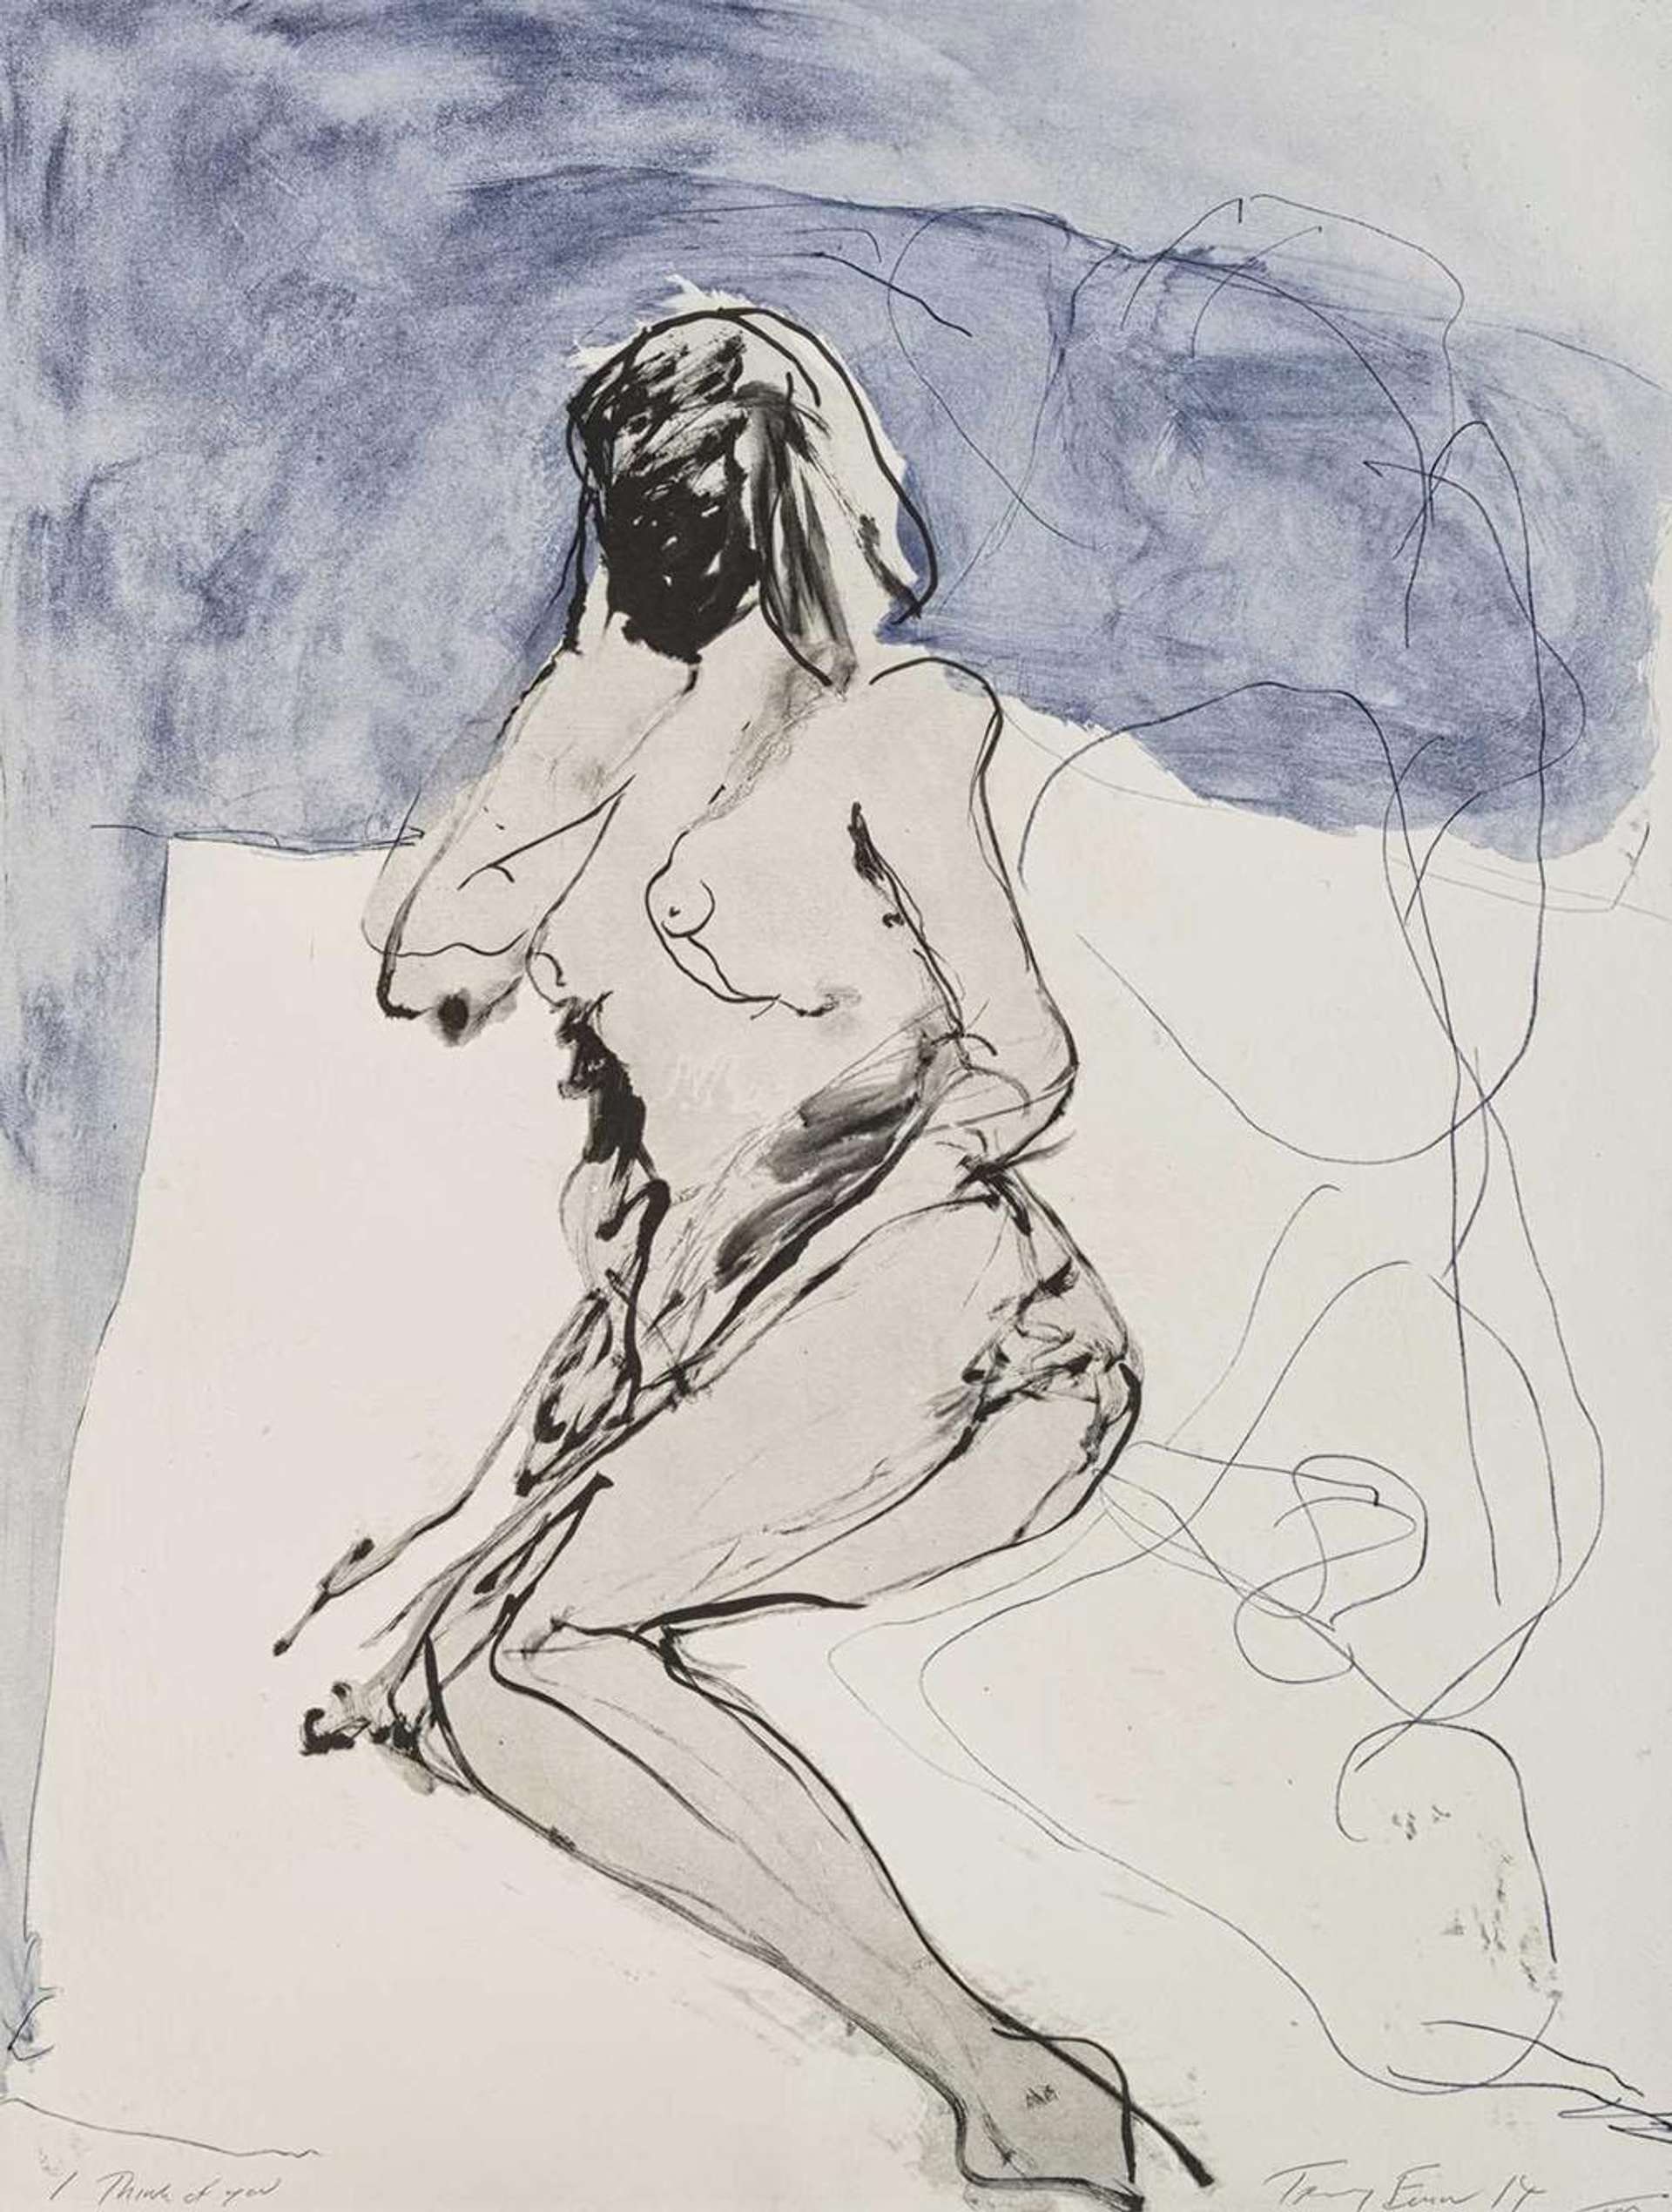 A lithograph depicting a womanly figure reclines along the composition, with a light wash of blue framing her body and a fluid series of lines mimicking her pose to the right.